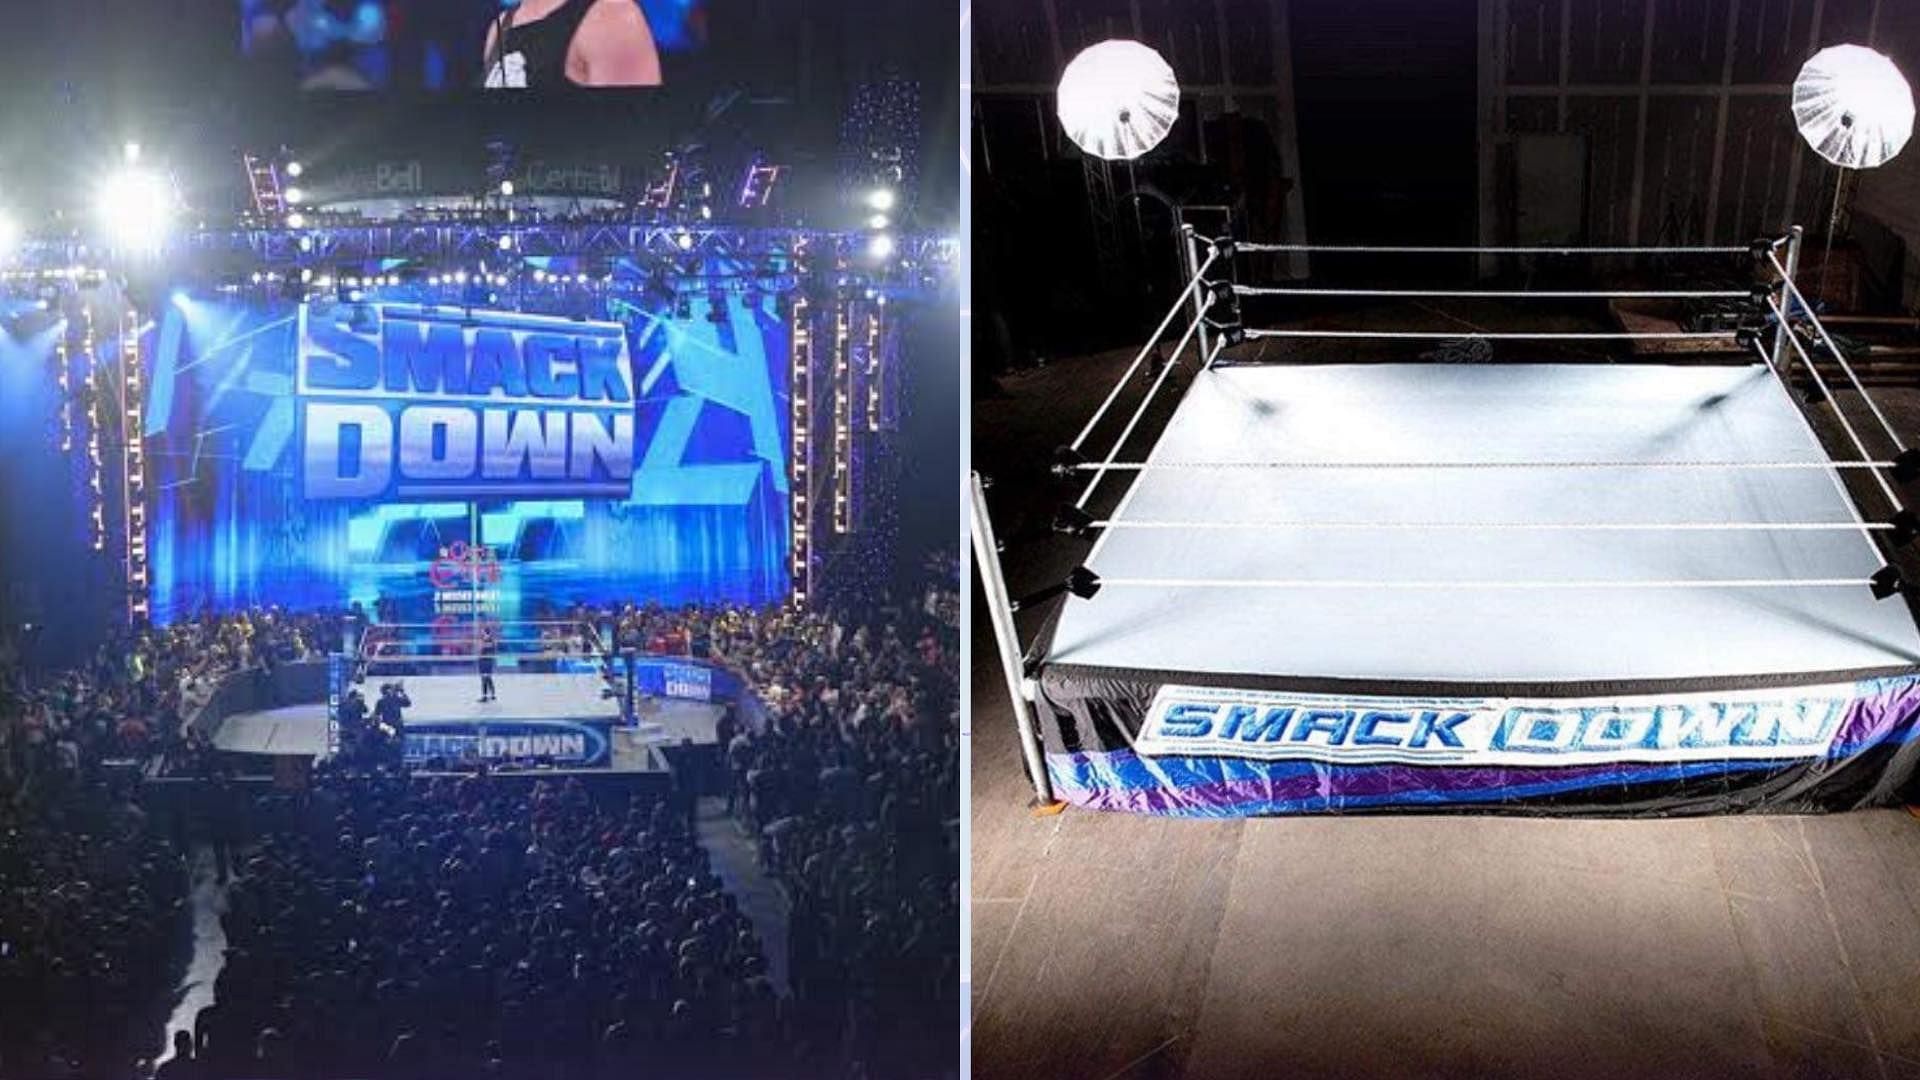 WWE SmackDown this week was live from the Delta Center in Salt Lake City, Utah